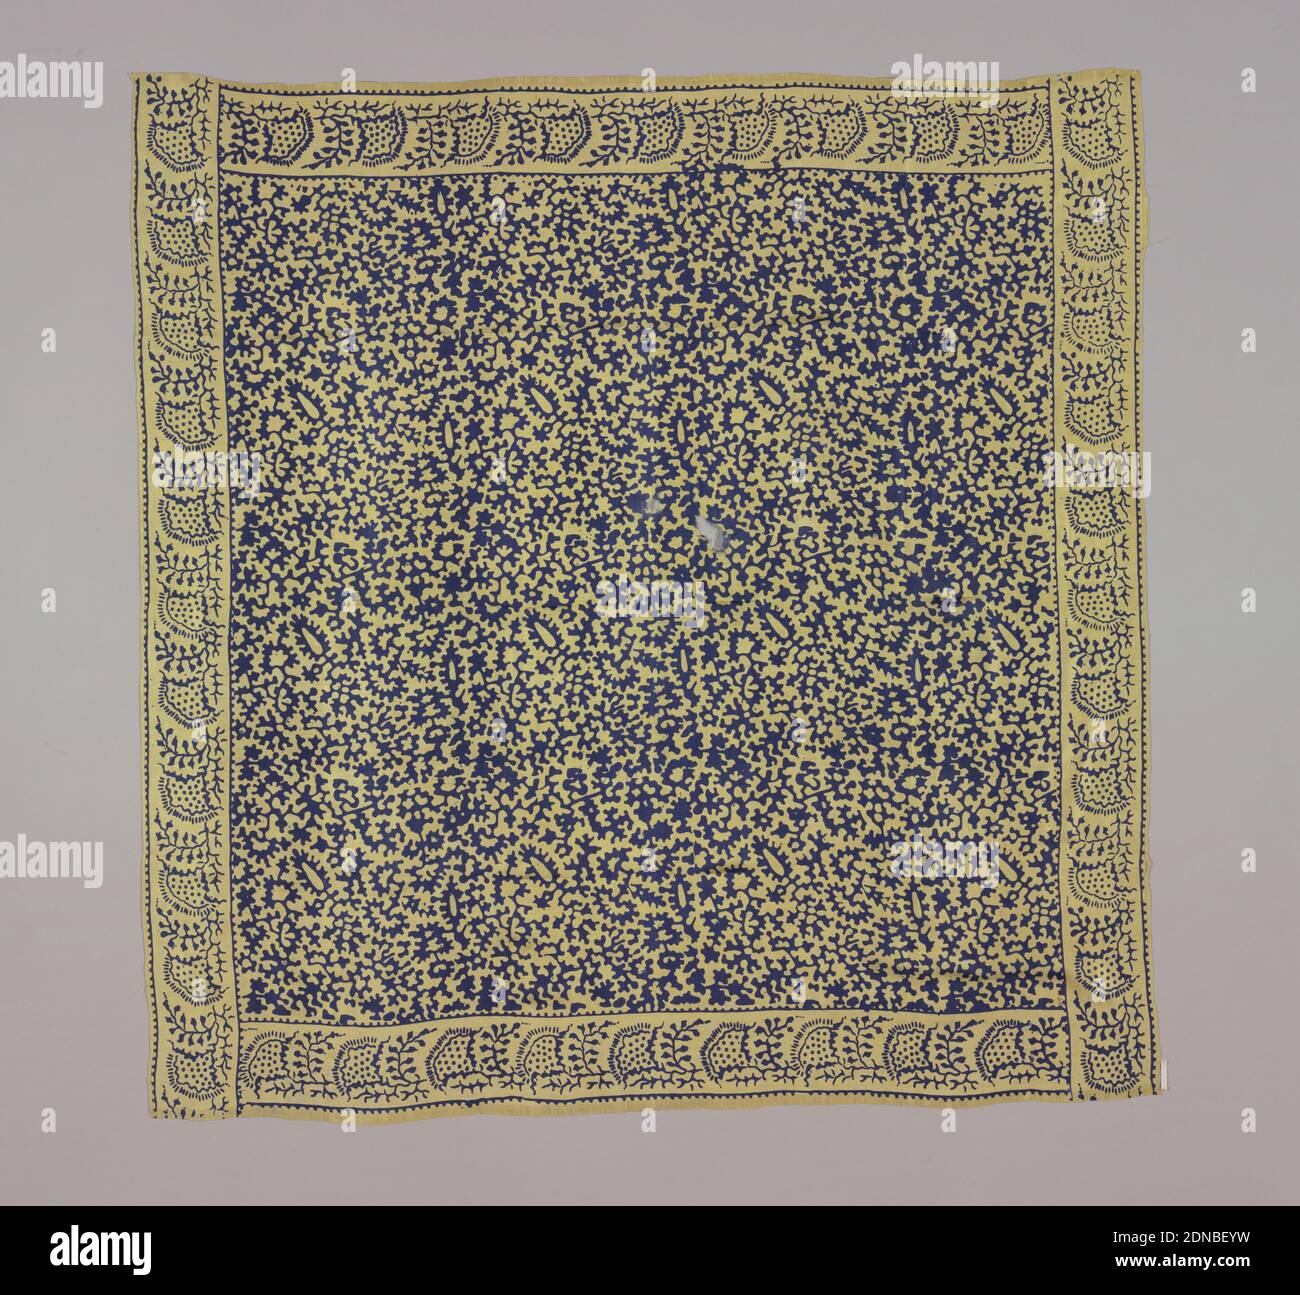 Square, Medium: silk Technique: printed, Yellow square with highly conventionalized design of plant forms in dark blue. Initials IAW embroidered in tiny red cross stitch in one corner., India, late 19th century, printed, dyed & painted textiles, Square Stock Photo